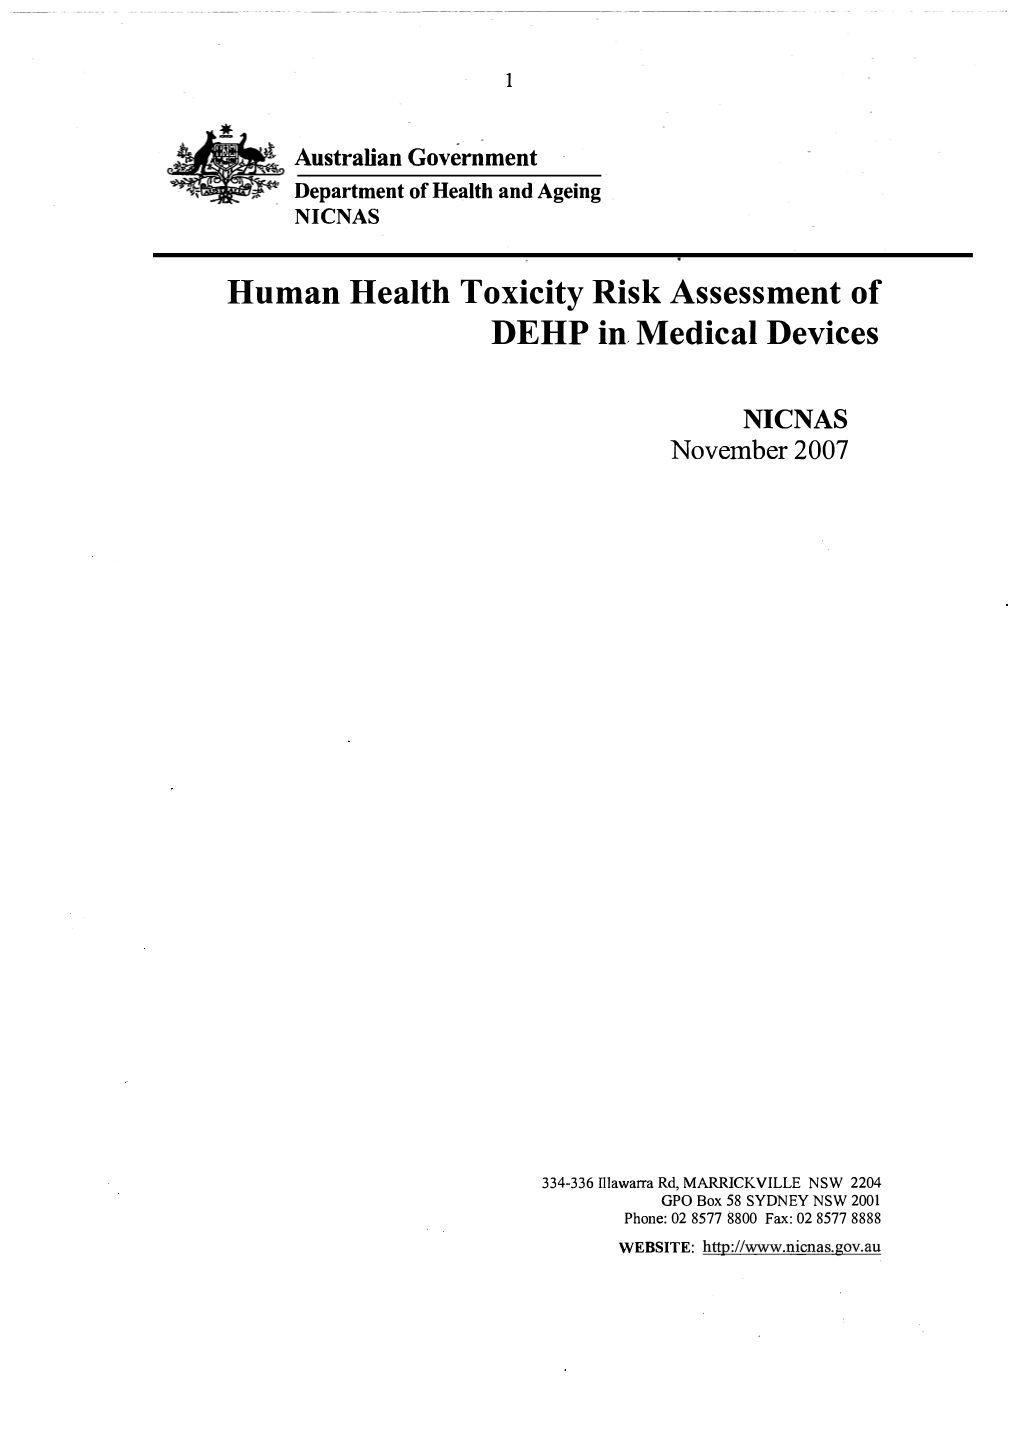 Human Health Toxicity Risk Assessment of DEHP in Medical Devices